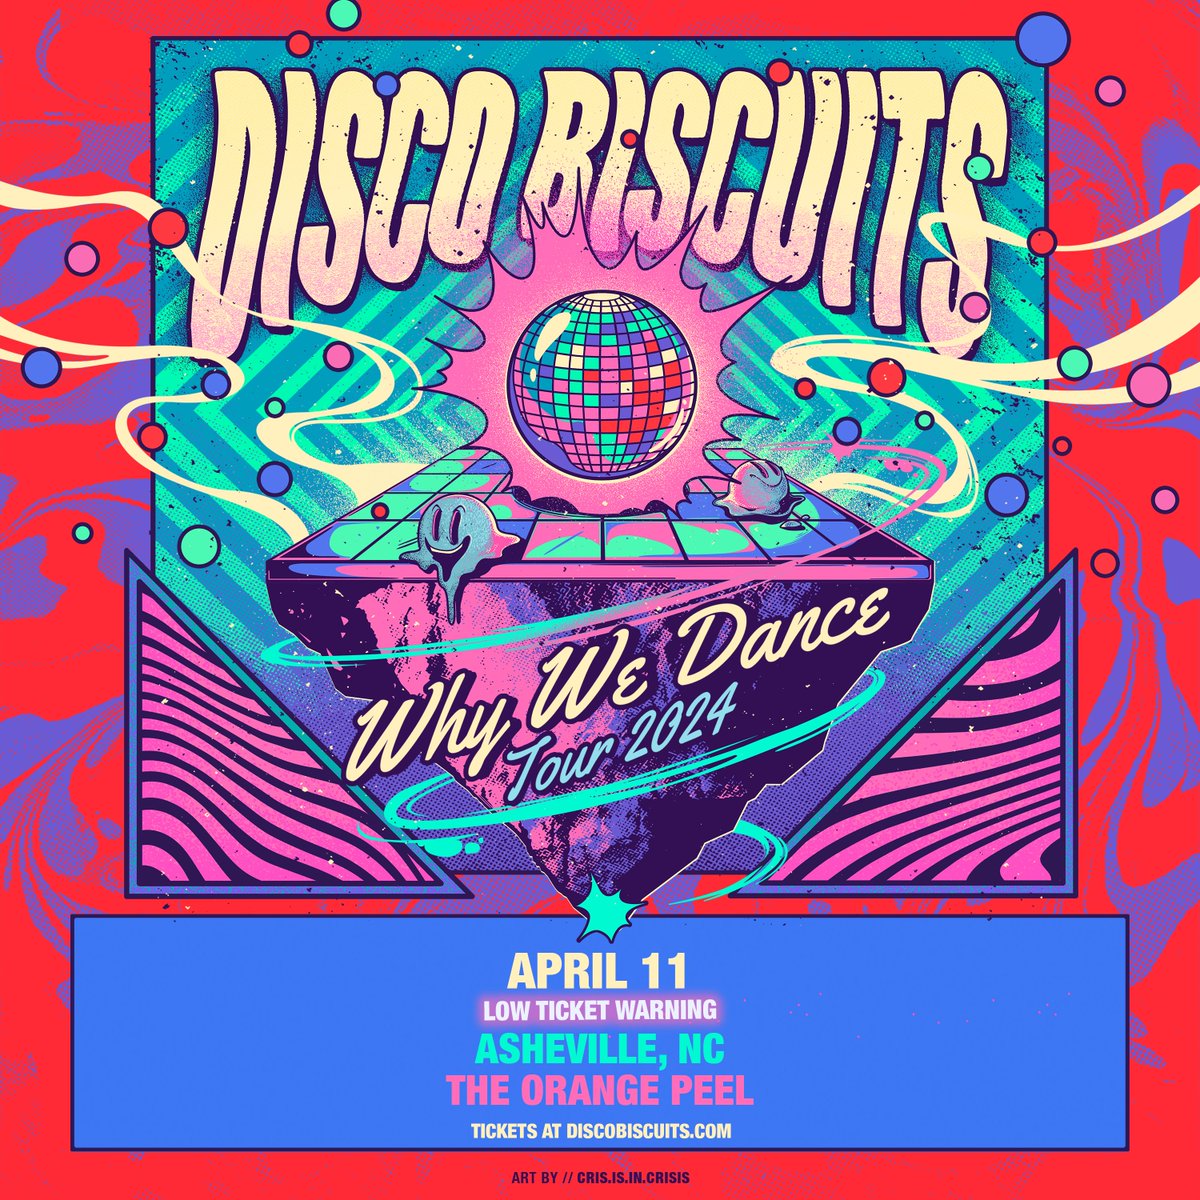 Tickets to Thursday's show @ThePeel in Asheville, NC are running low! 🎟️ 👉 discobiscuits.com/shows